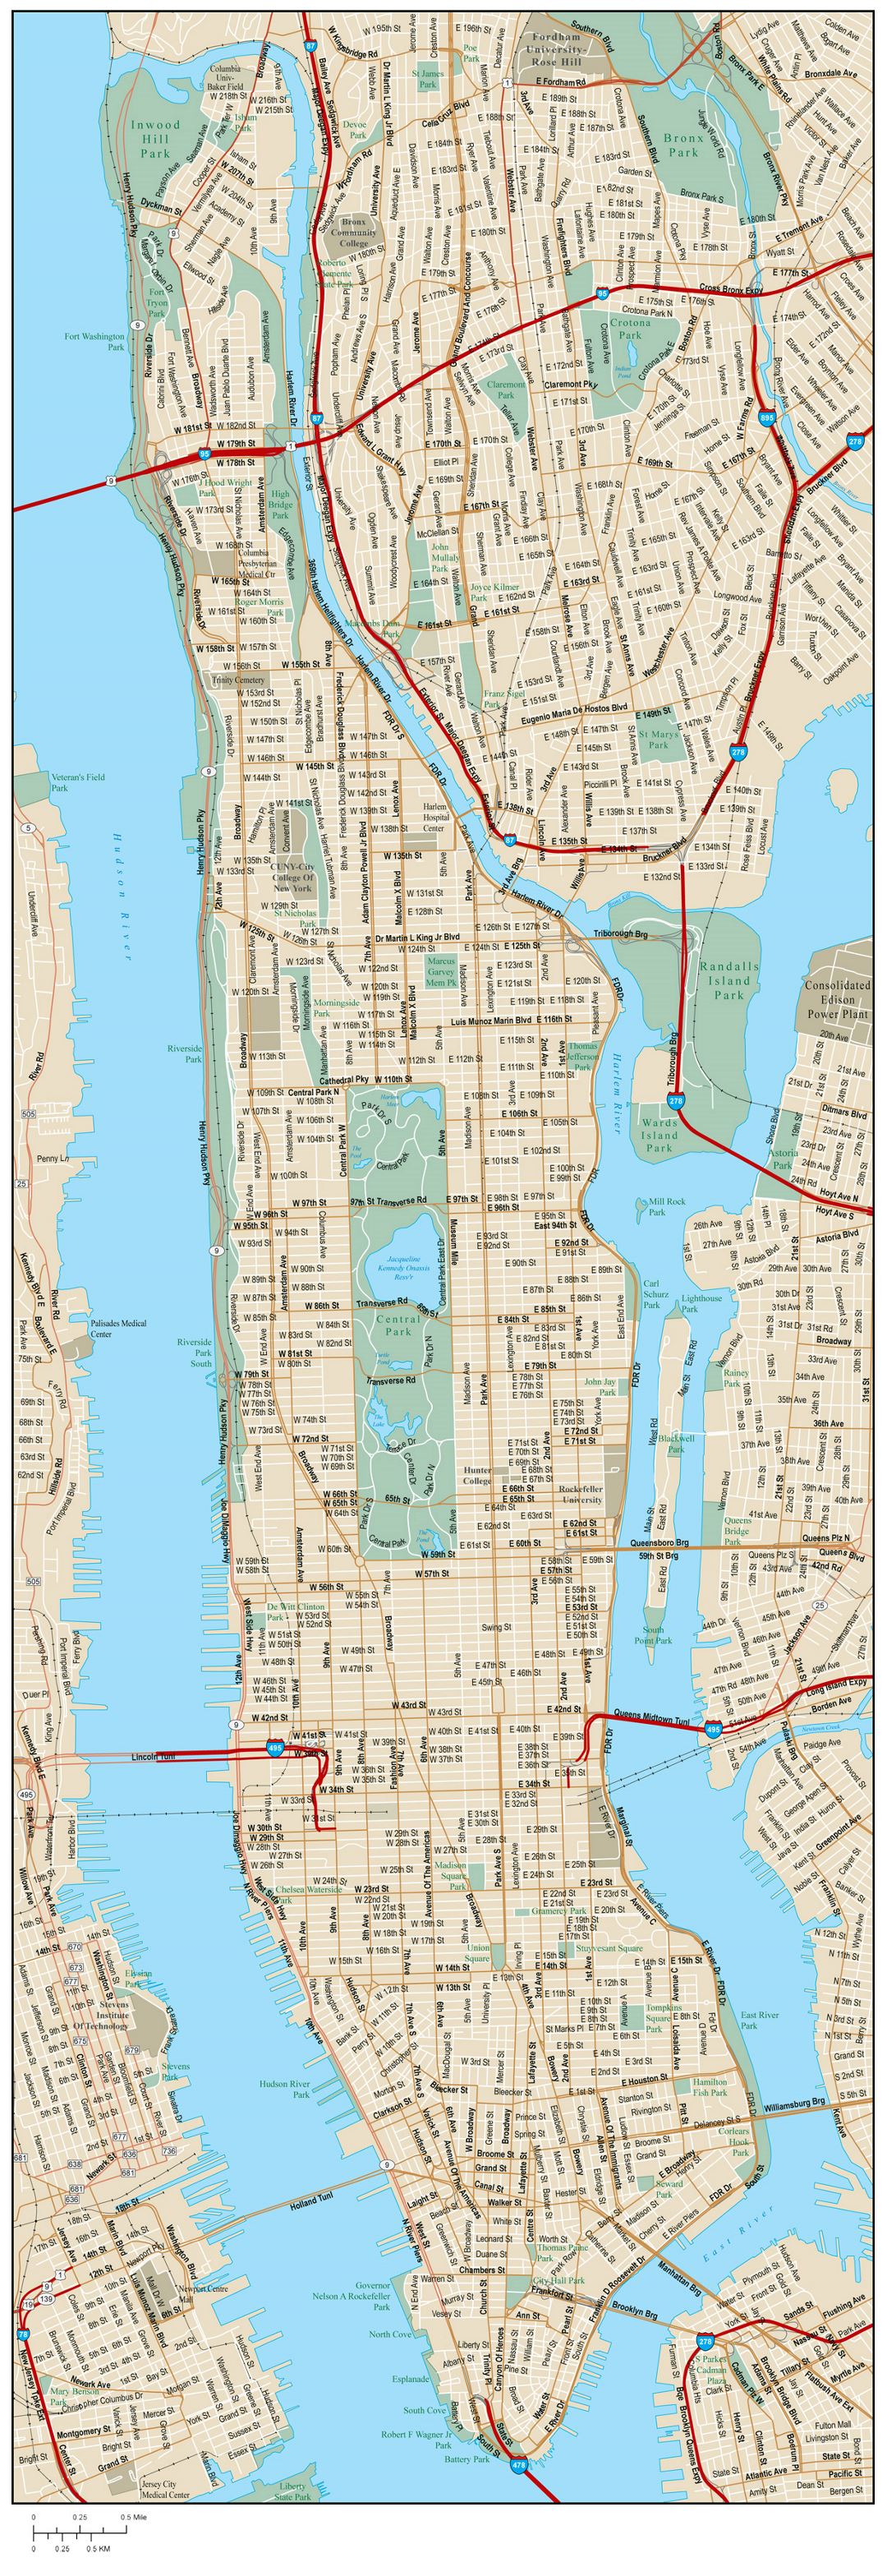 Large road map of Manhattan with street names